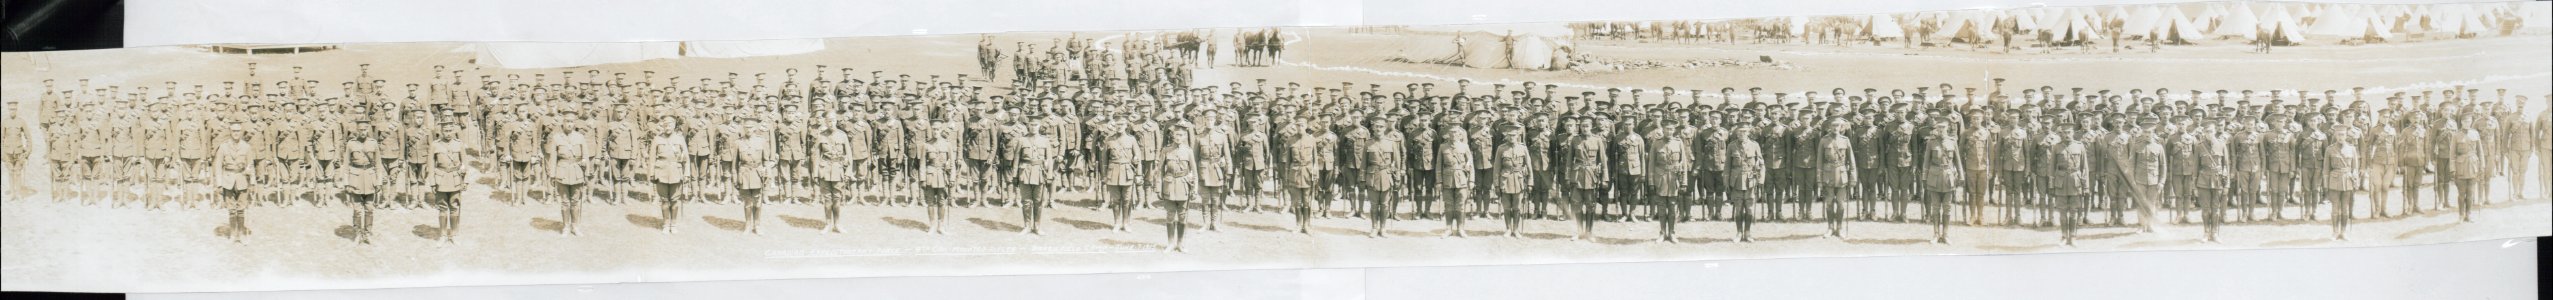 8th Mounted Rifles, Barriefield Camp (HS85-10-30560) original photo